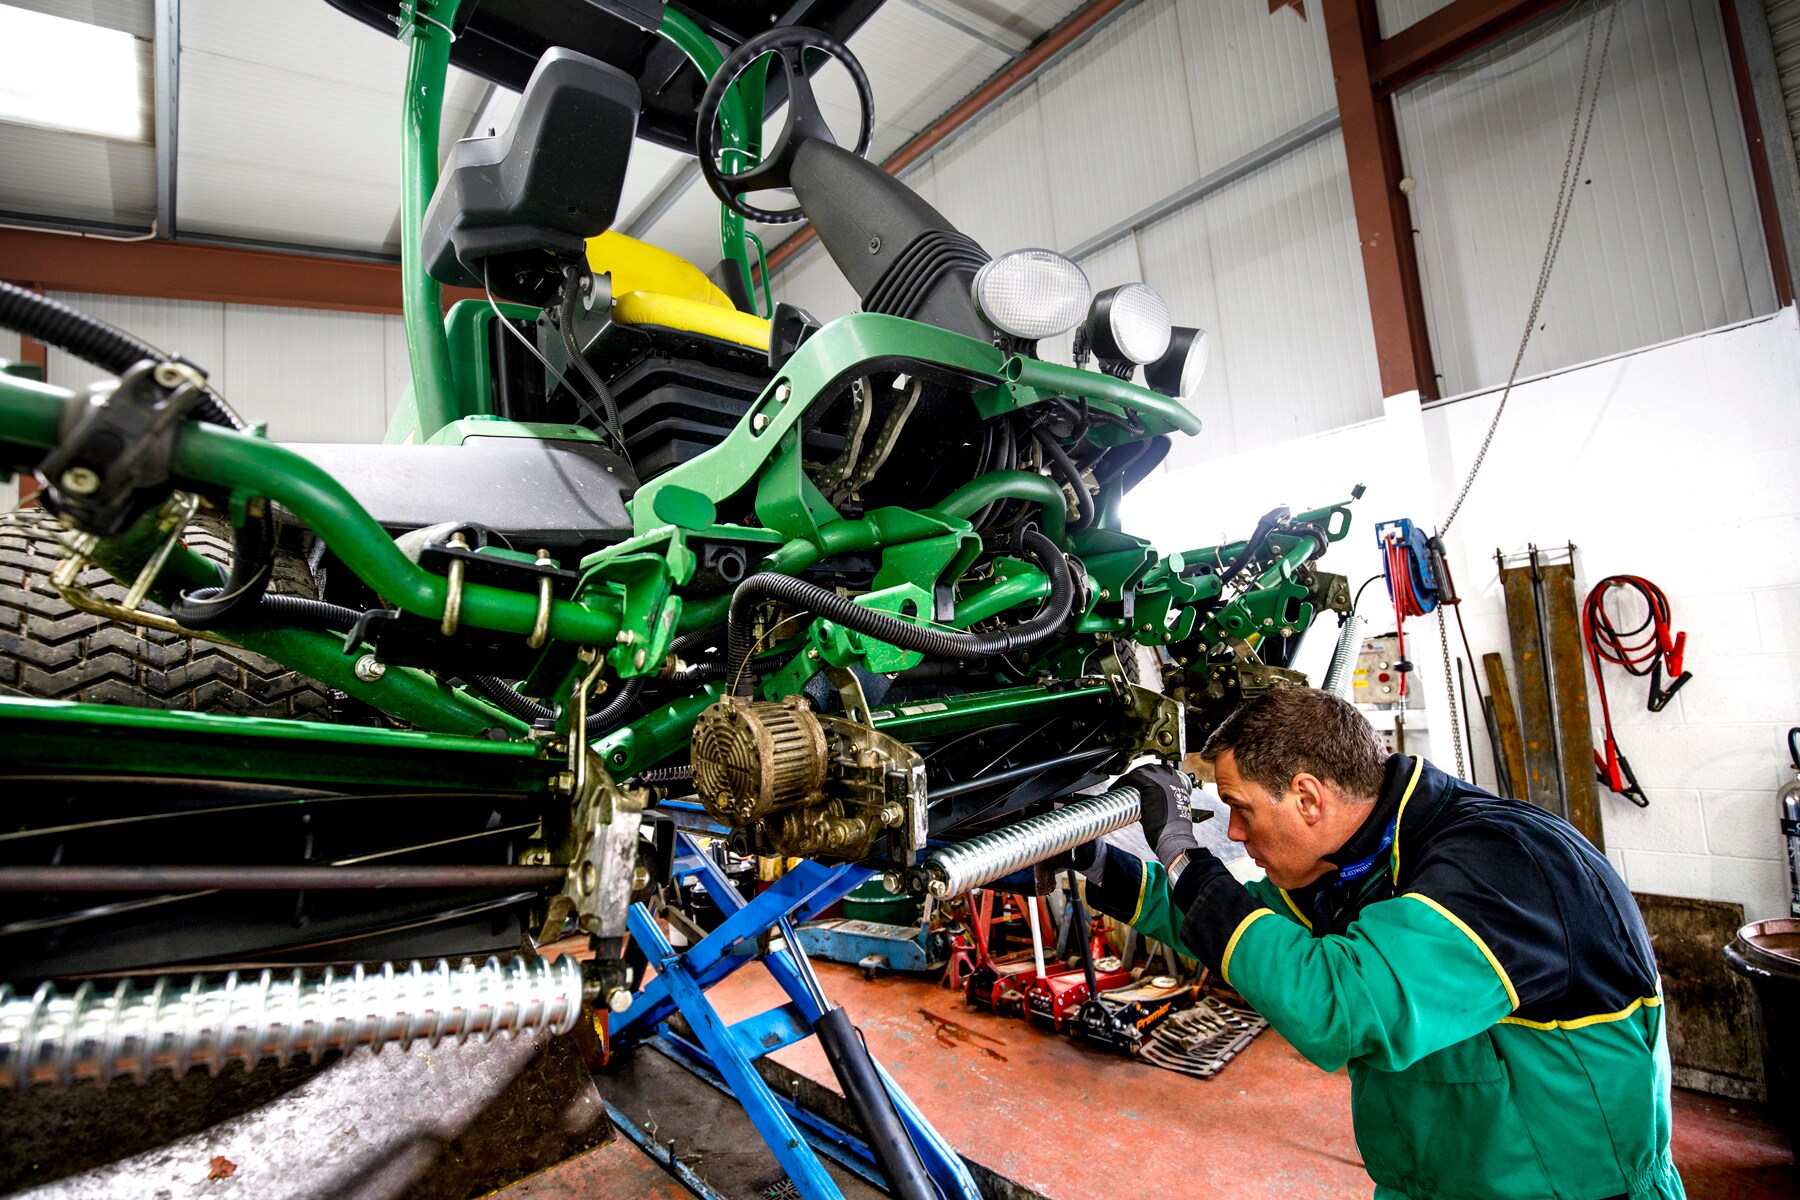 John Deere and dealer support for golf tournaments includes helping the greenkeeping team to keep the machinery fleet serviced and ready for work each day.